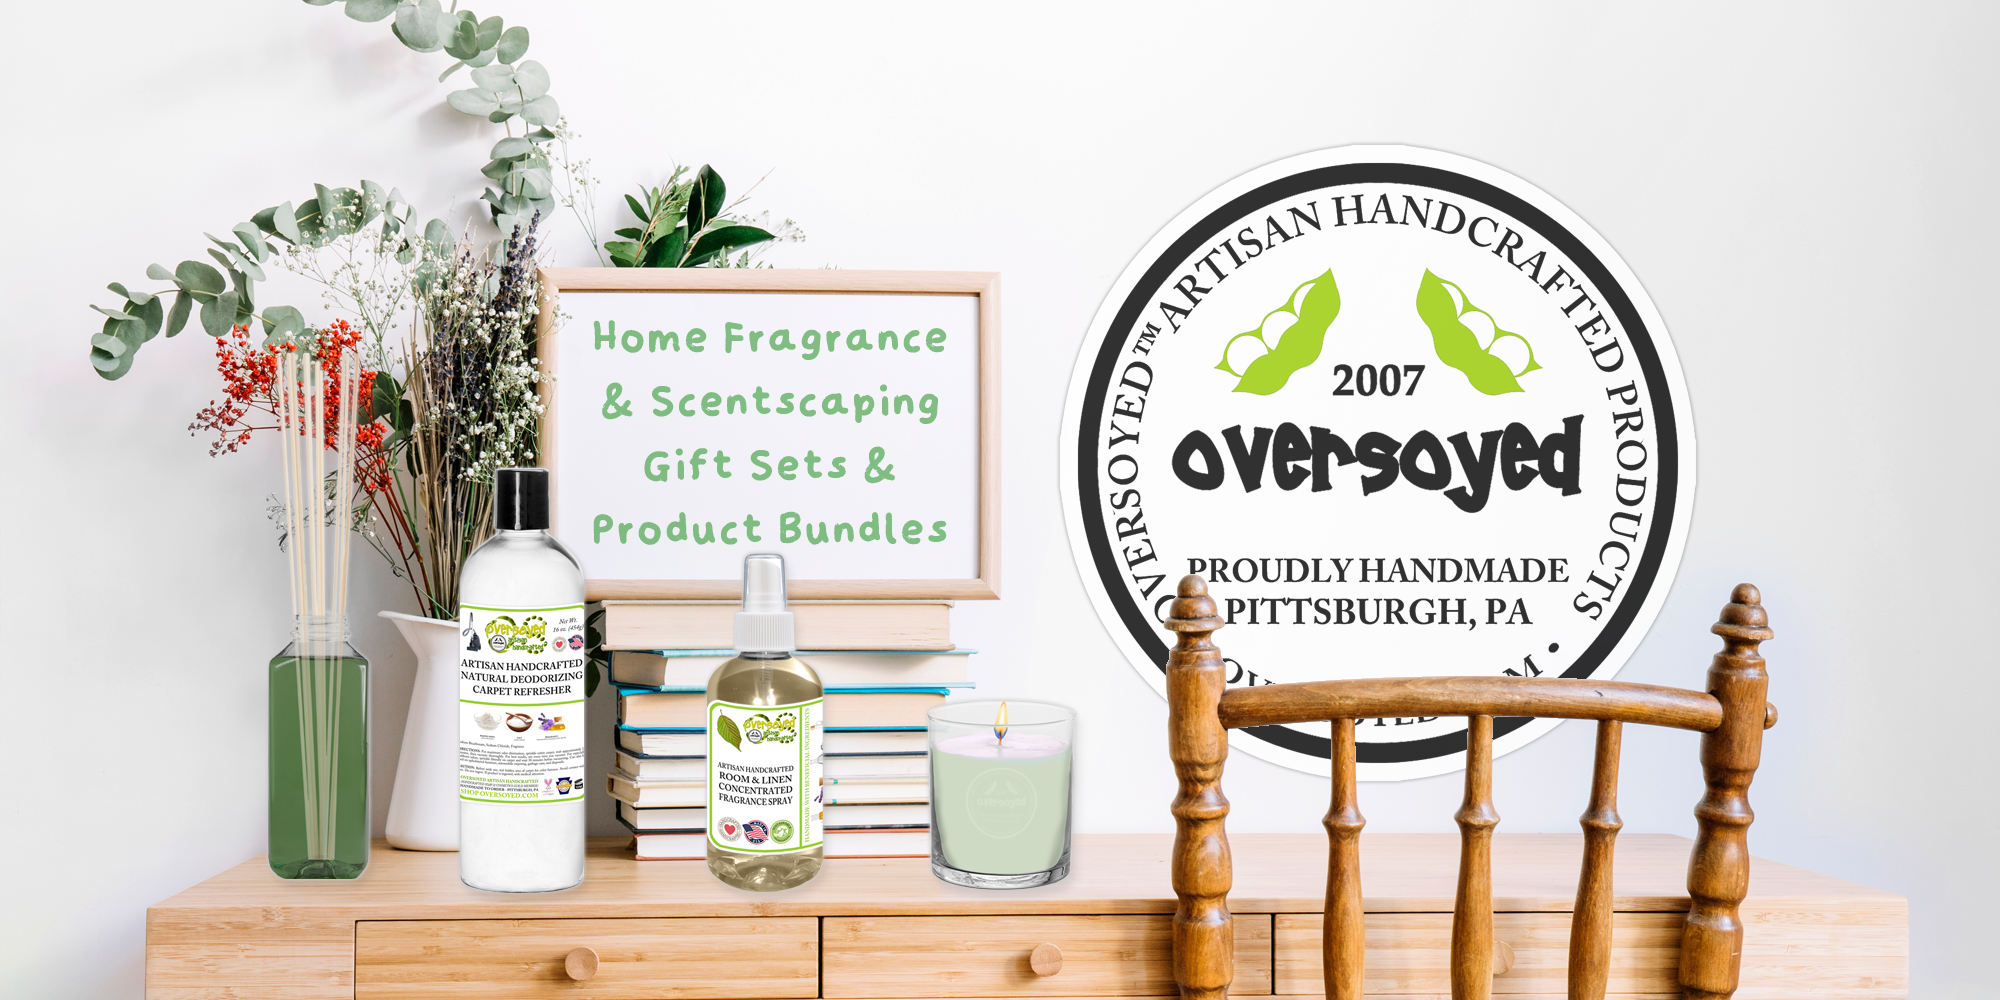 OverSoyed Artisan Handcrafted Products - Home Fragrance & Scentscaping Gift Sets